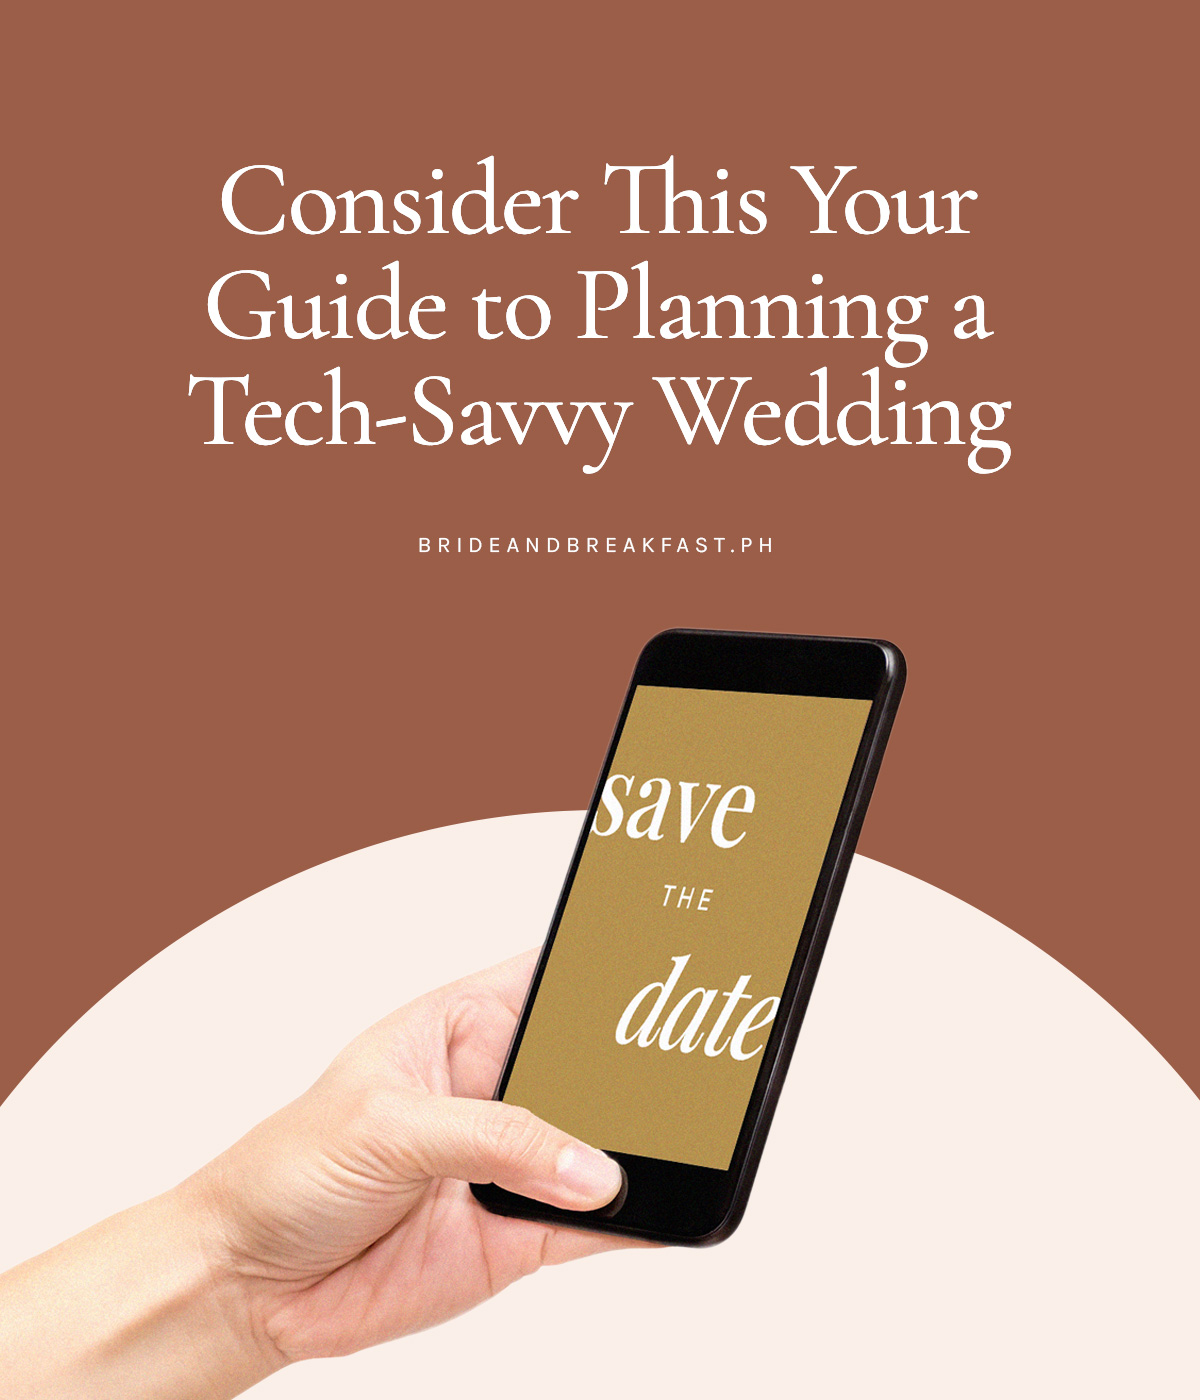 Consider This Your Guide to Planning a Tech-Savvy Wedding